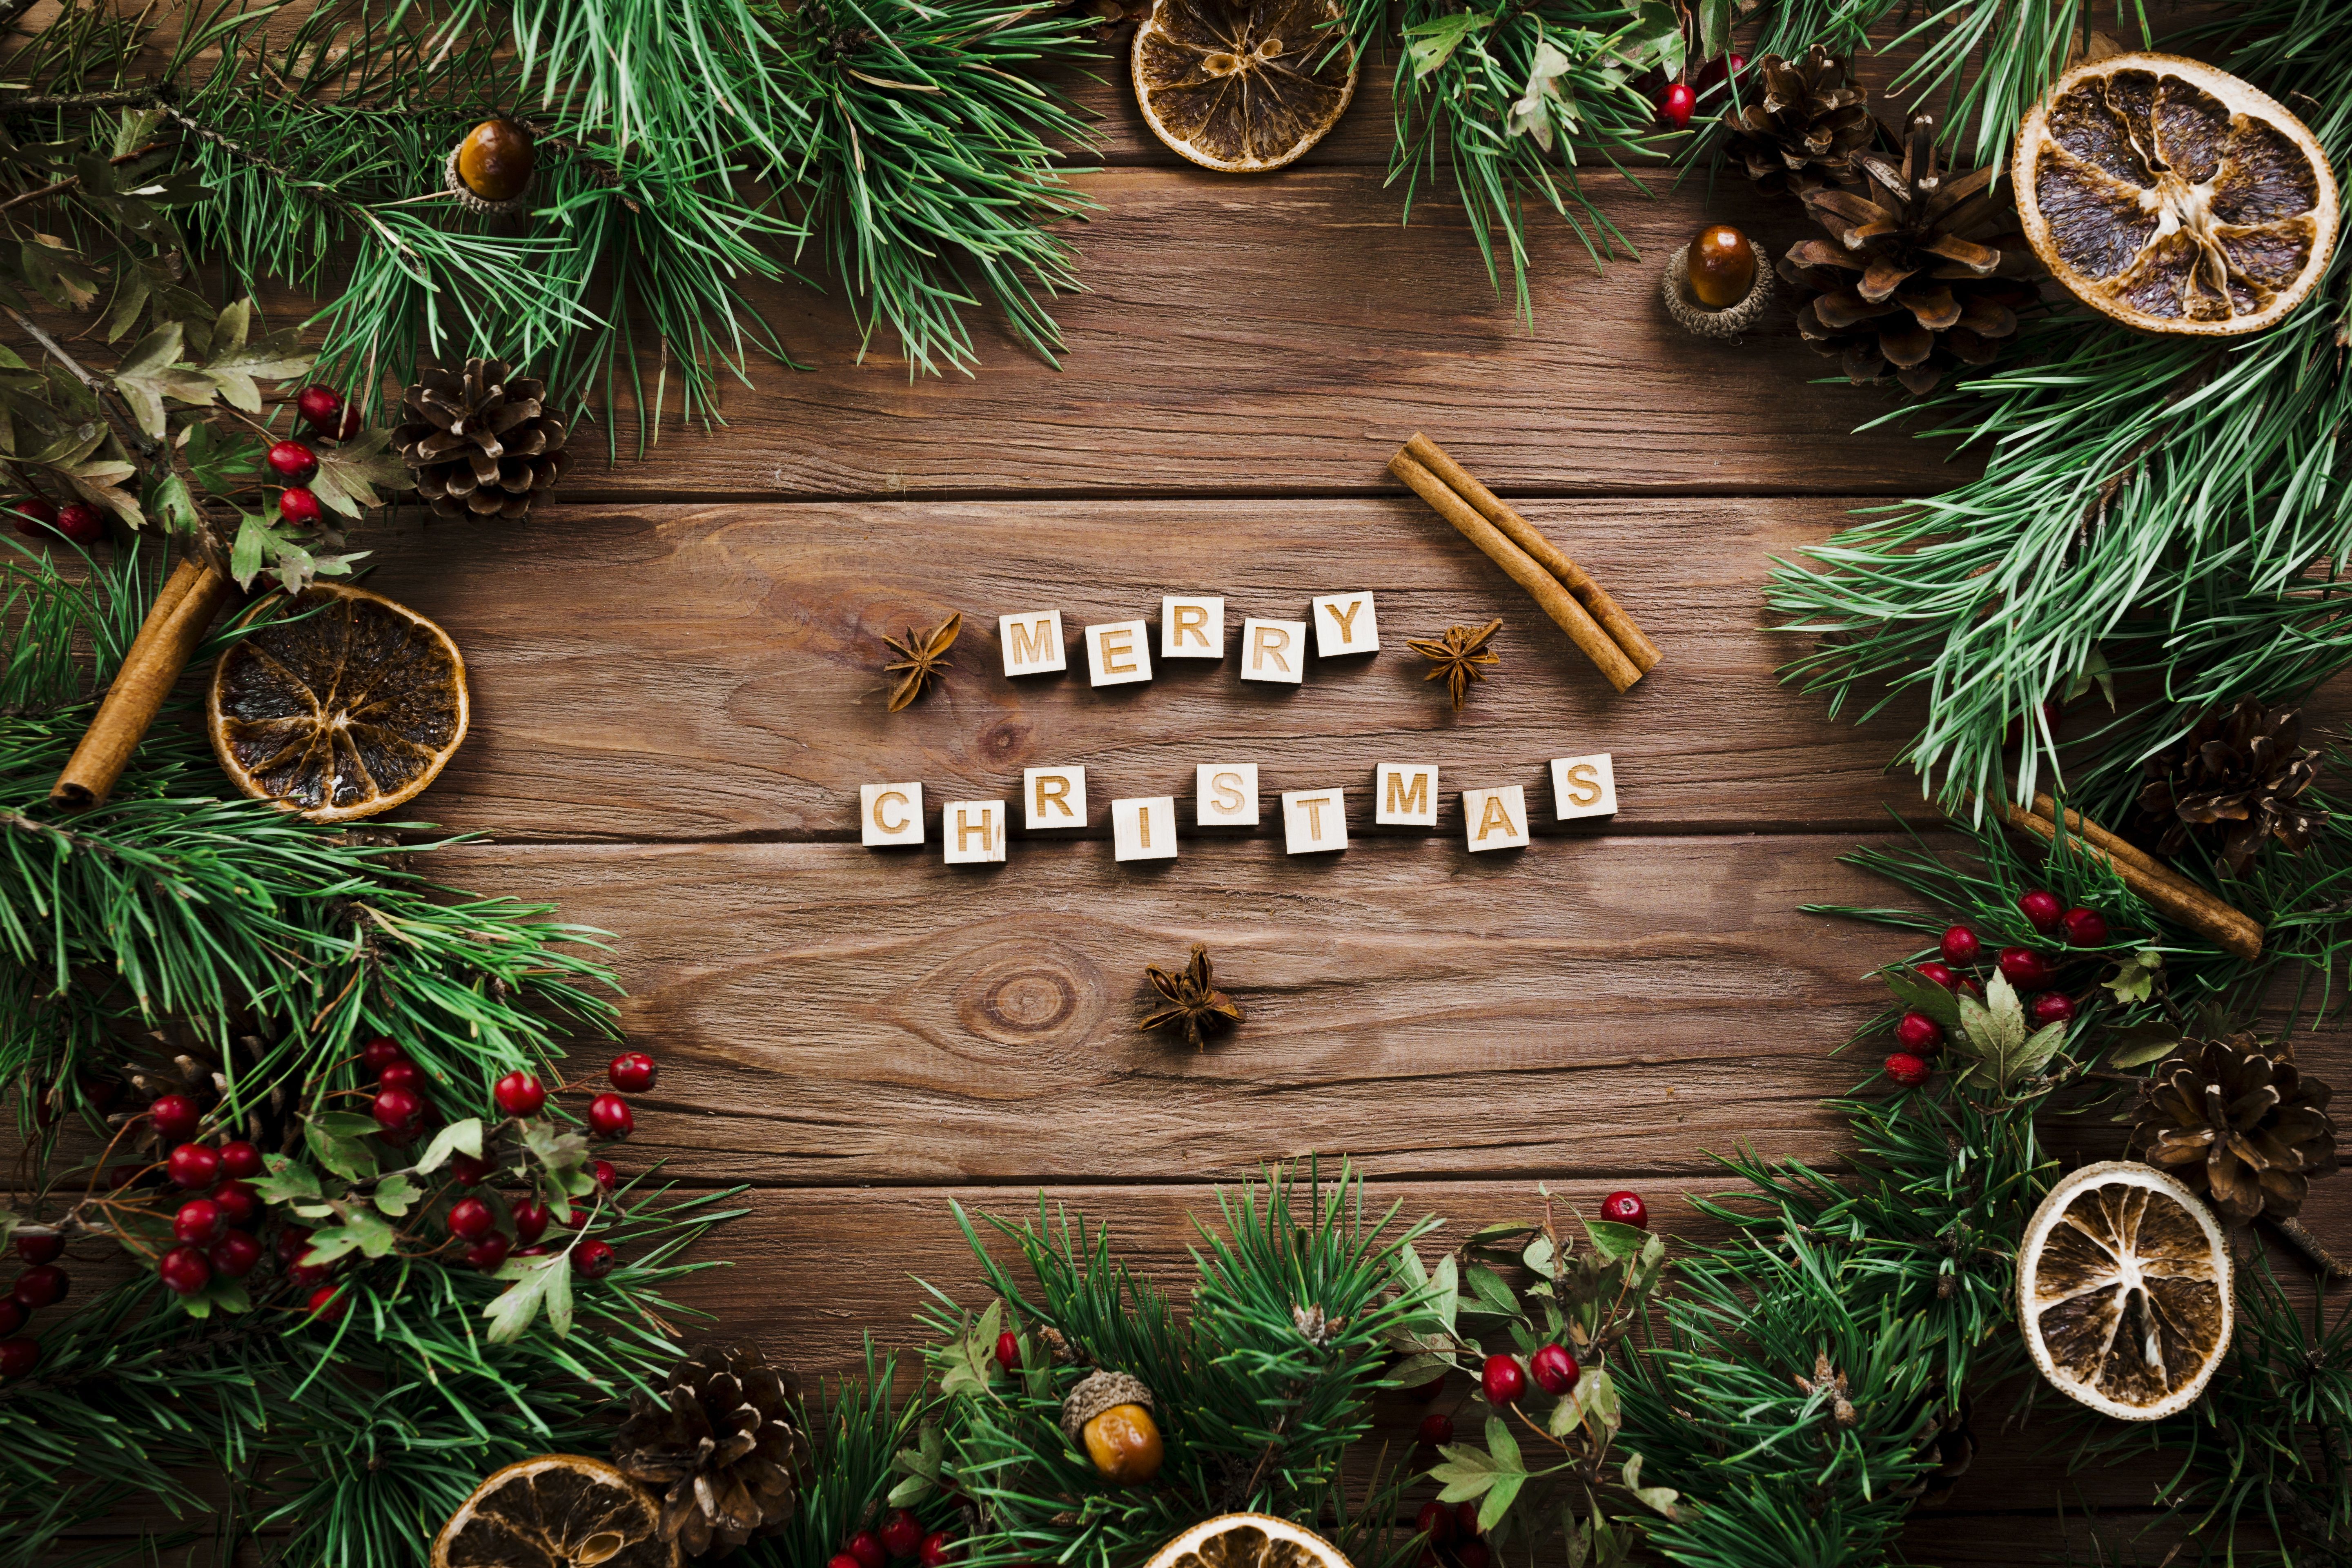 Merry Christmas lettering on a wooden table with fir branches. Desktop wallpaper 1400x1050